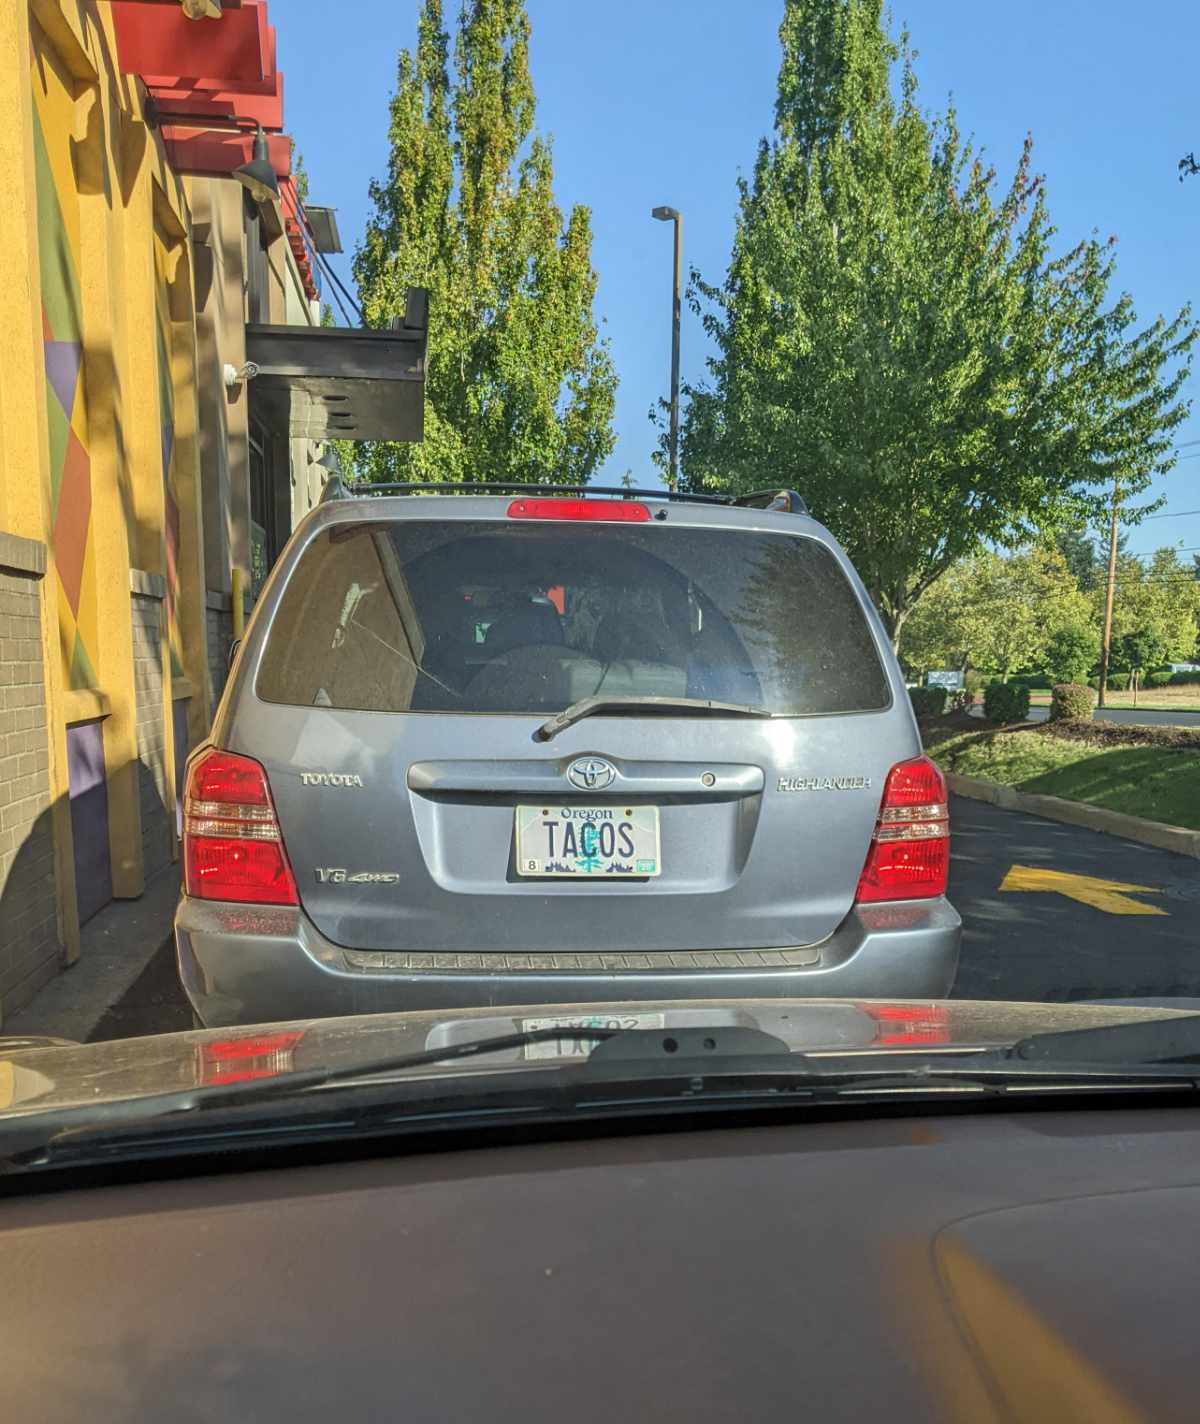 In the drive-thru at Taco Bell